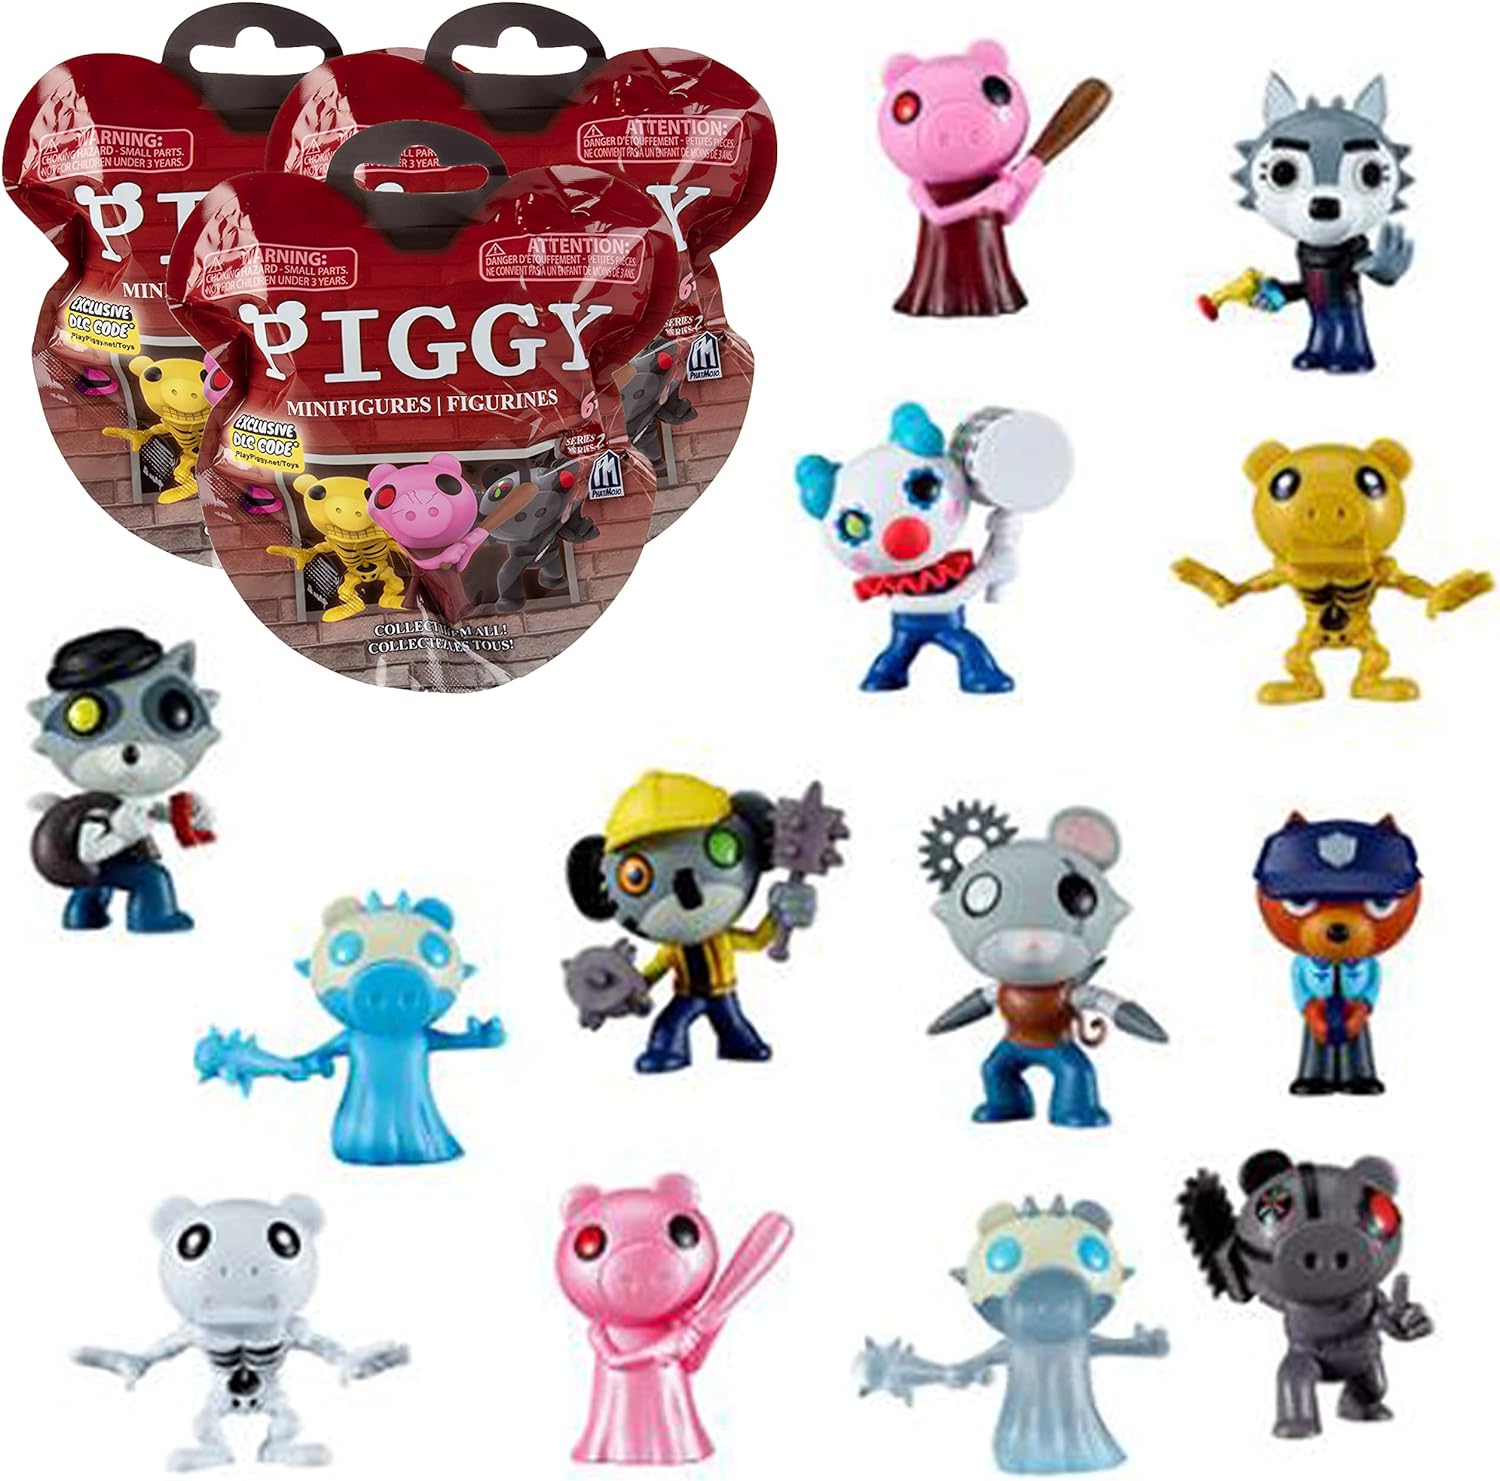 Piggy Action Figure 6 Pack - Six 3.5 Articulated Buildable Toys with Exclusive Minitoon Figure, 9 Accessories, Series 2, Includes DLC